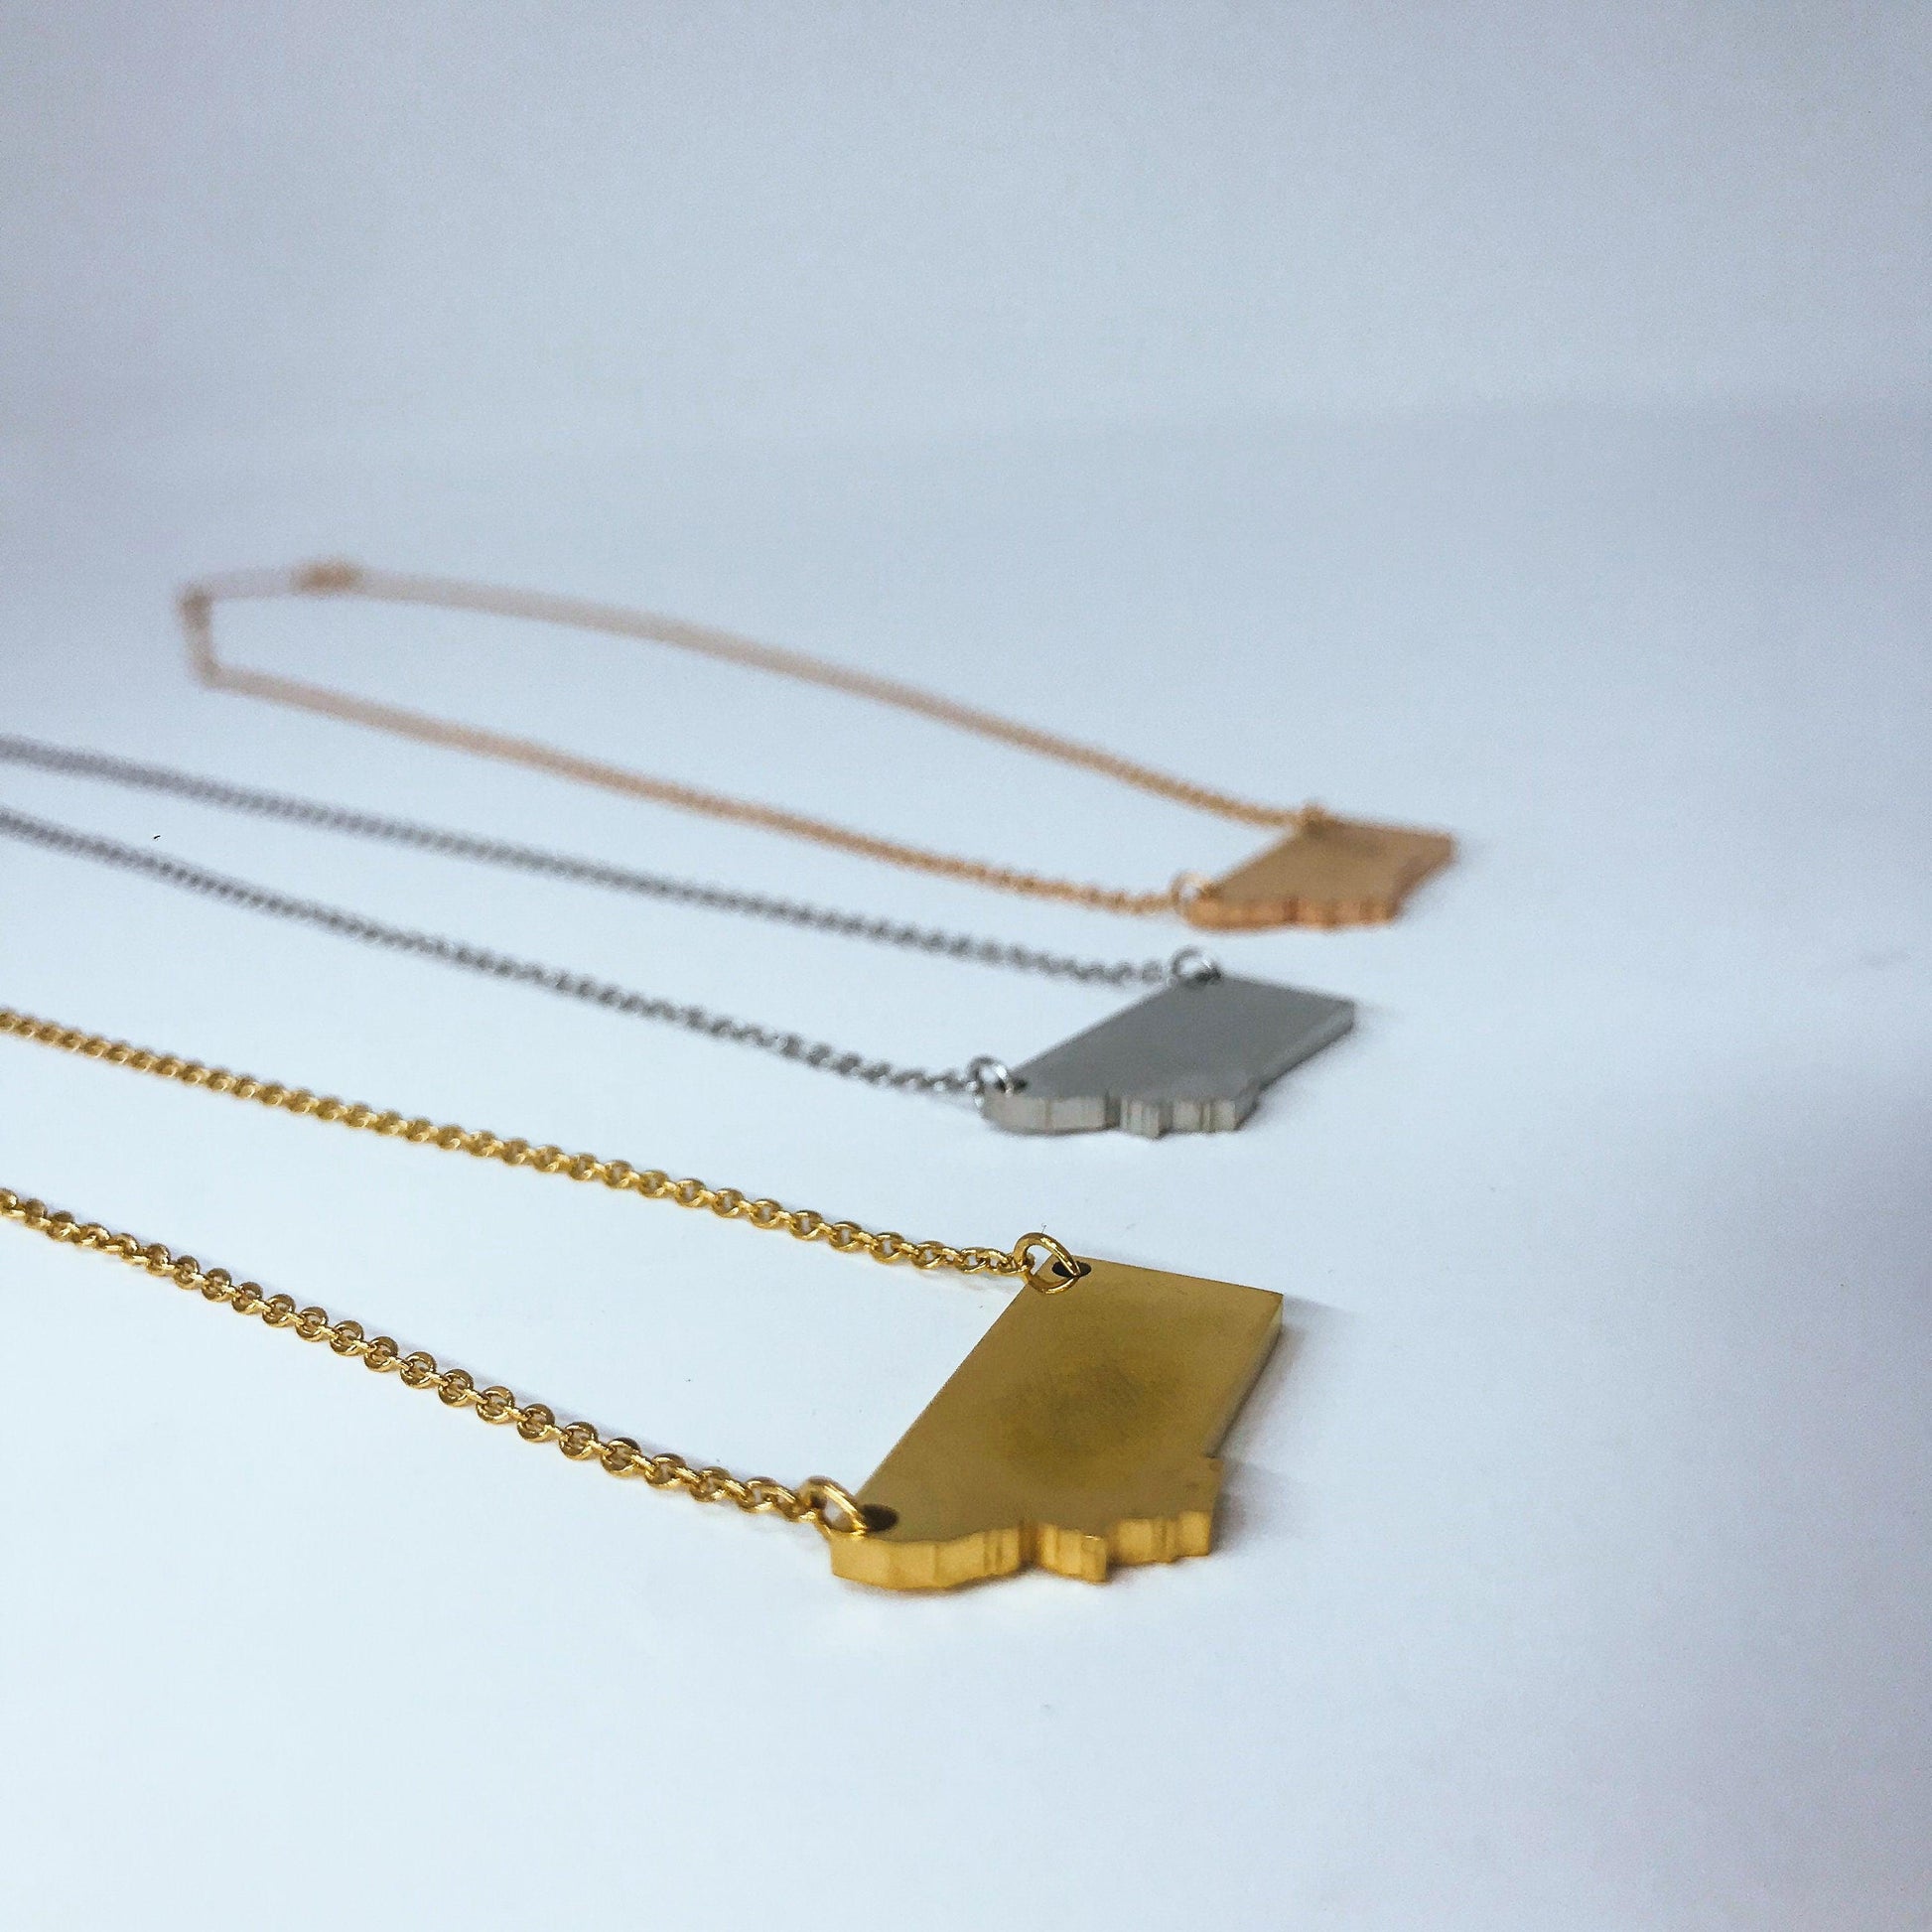 Montana State Silhouette Necklaces in 3 different colors: Gold, Silver & Rose Gold